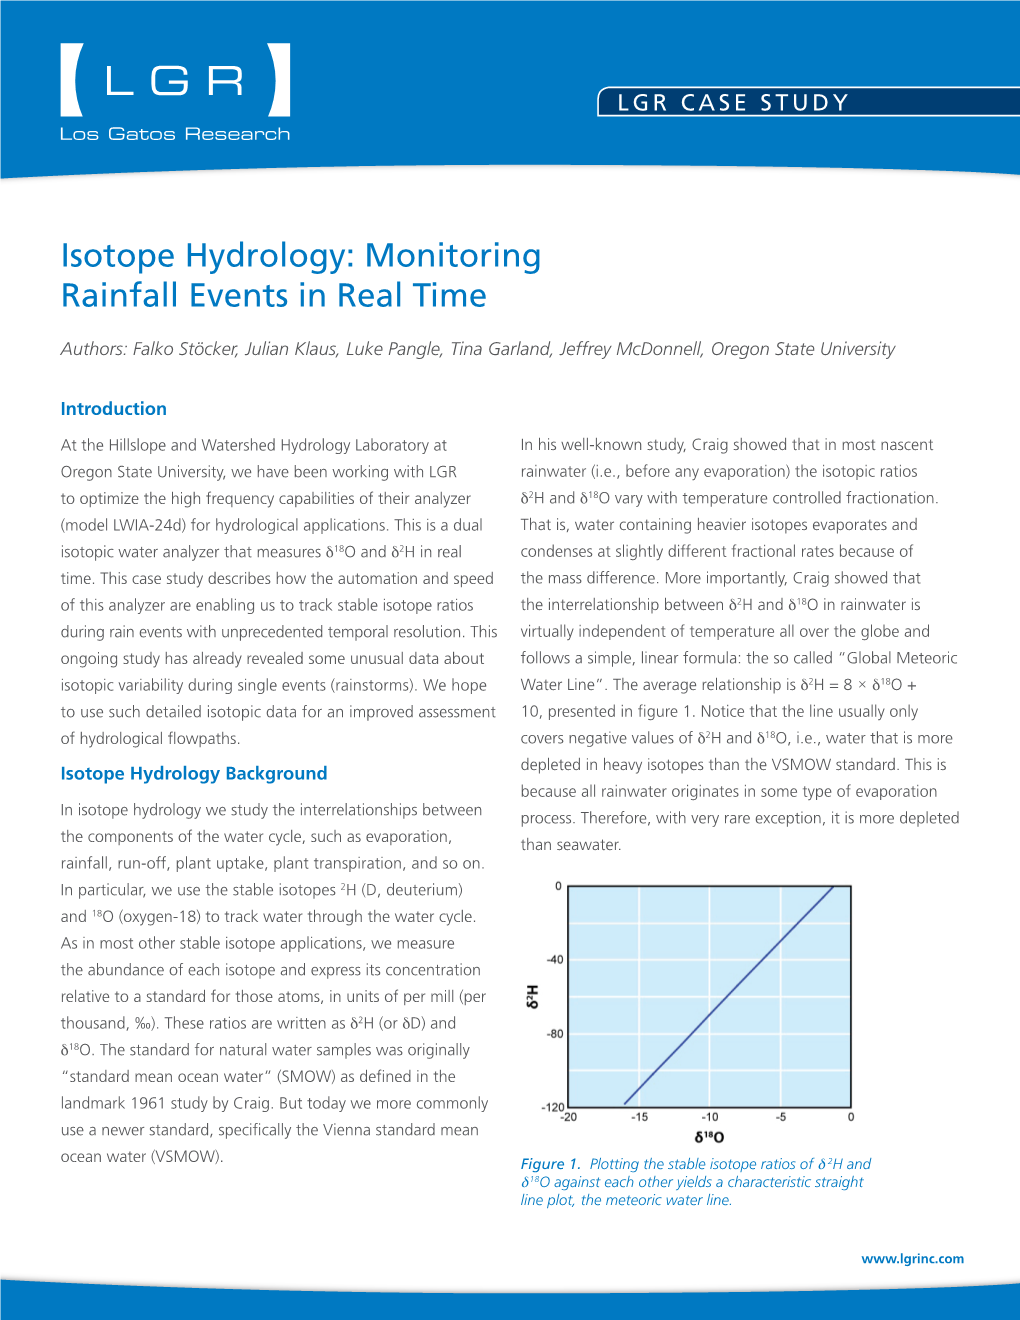 Isotope Hydrology: Monitoring Rainfall Events in Real Time